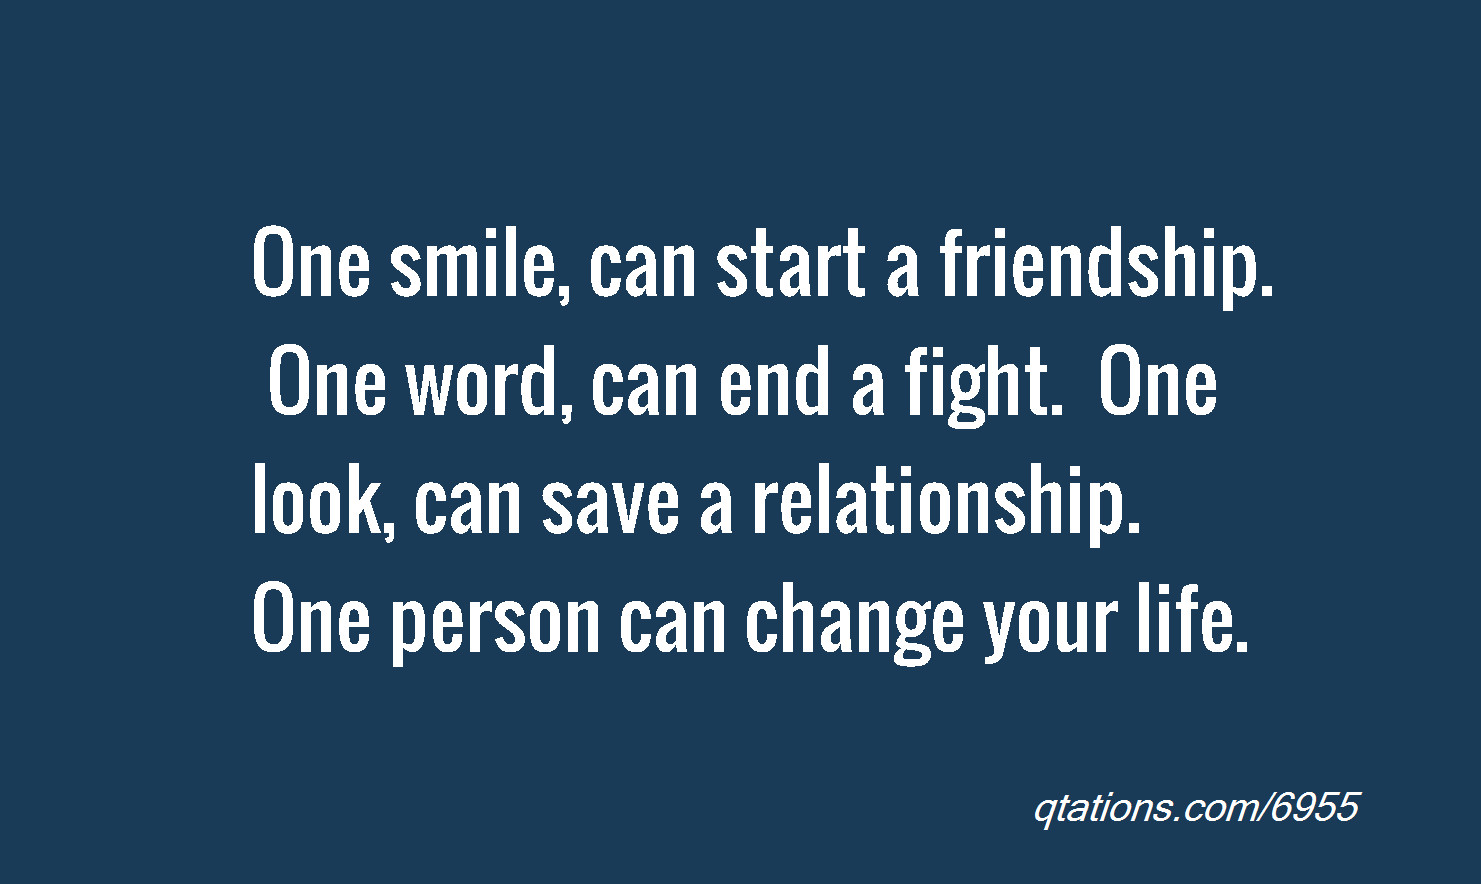 Saving A Relationship Quotes
 Quotes About Saving A Life QuotesGram